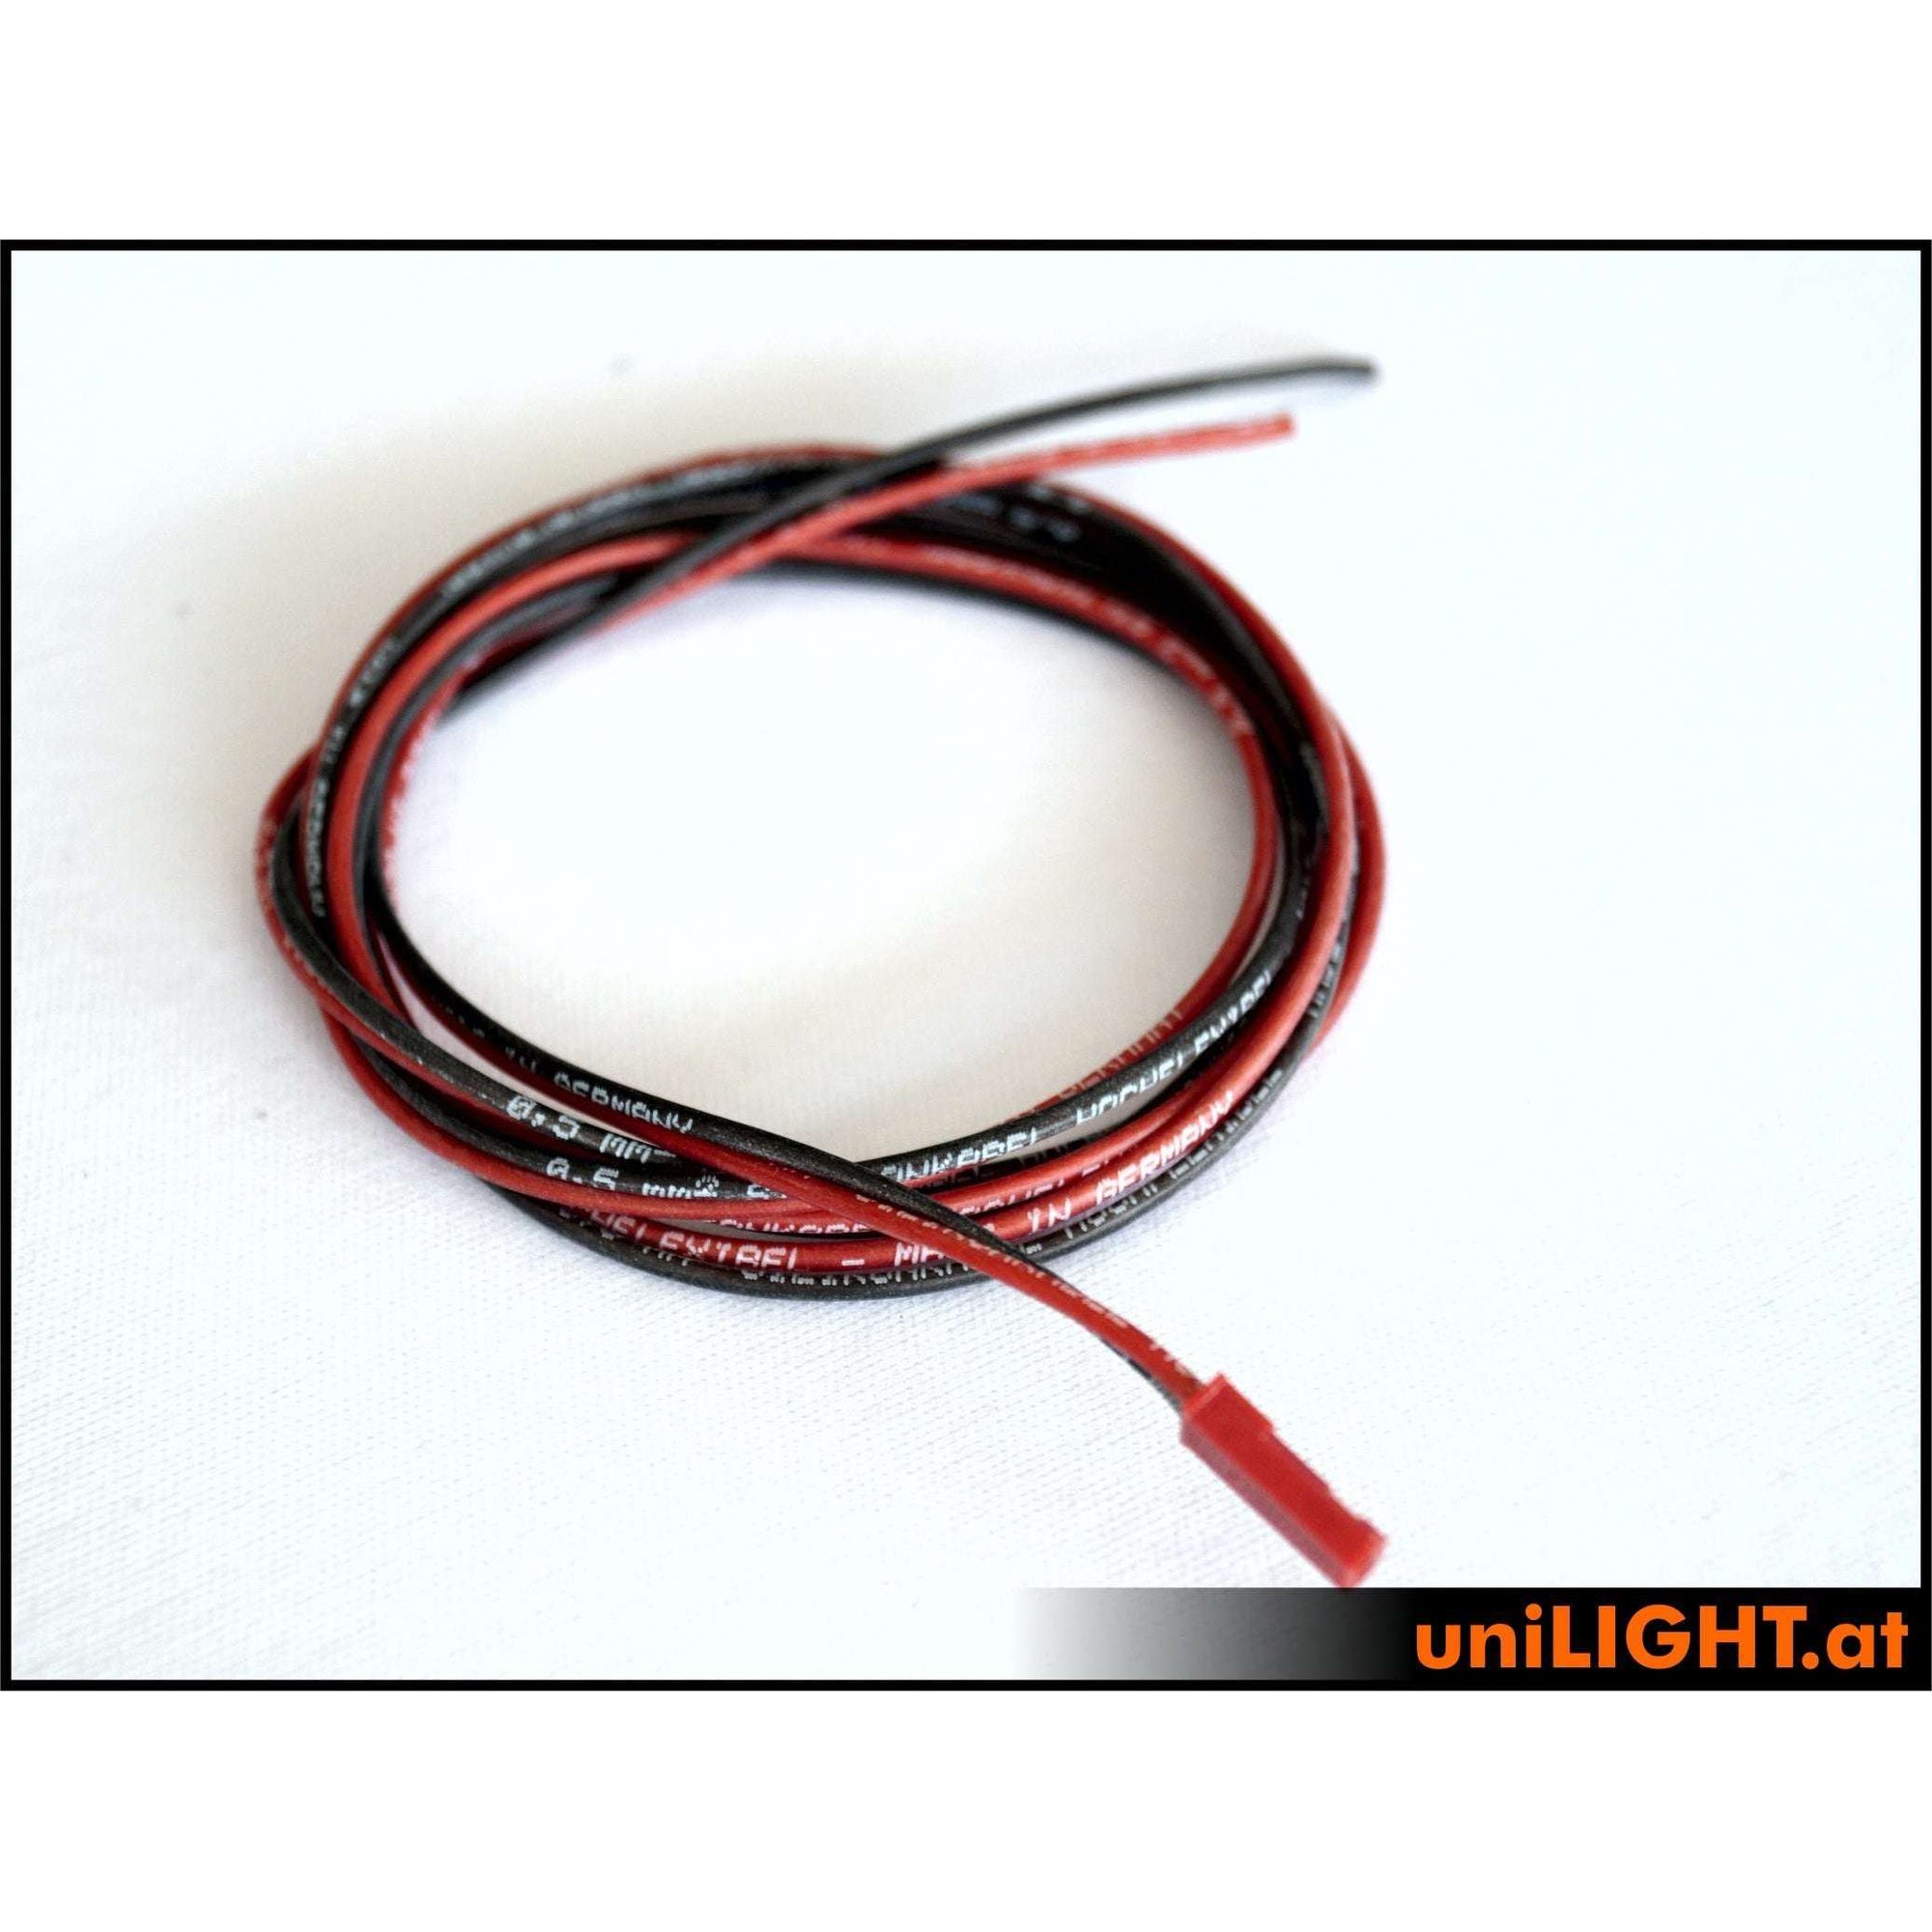 1m CABLE AFTERBURN